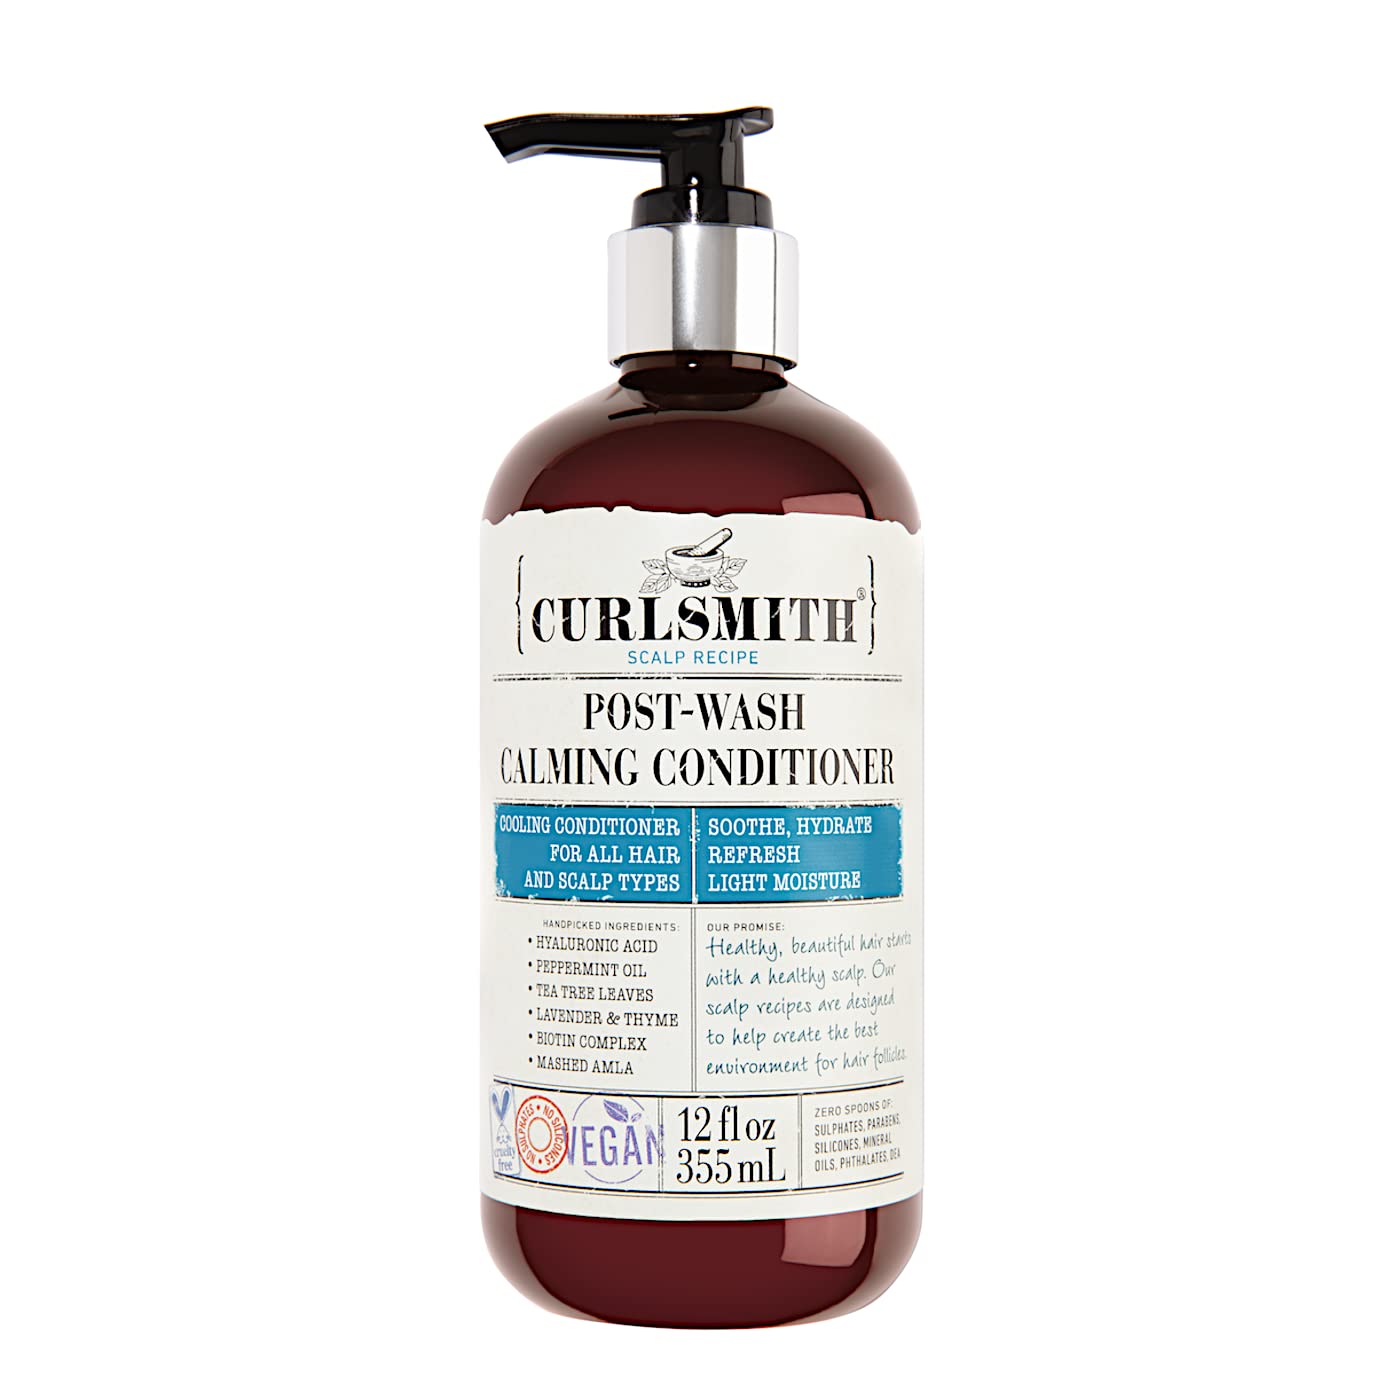 Curlsmith - Post-Wash Calming Conditioner - Vegan Cooling Rinse-Out Conditioner for any Hair Type, Scalp Soothing (12 fl oz)